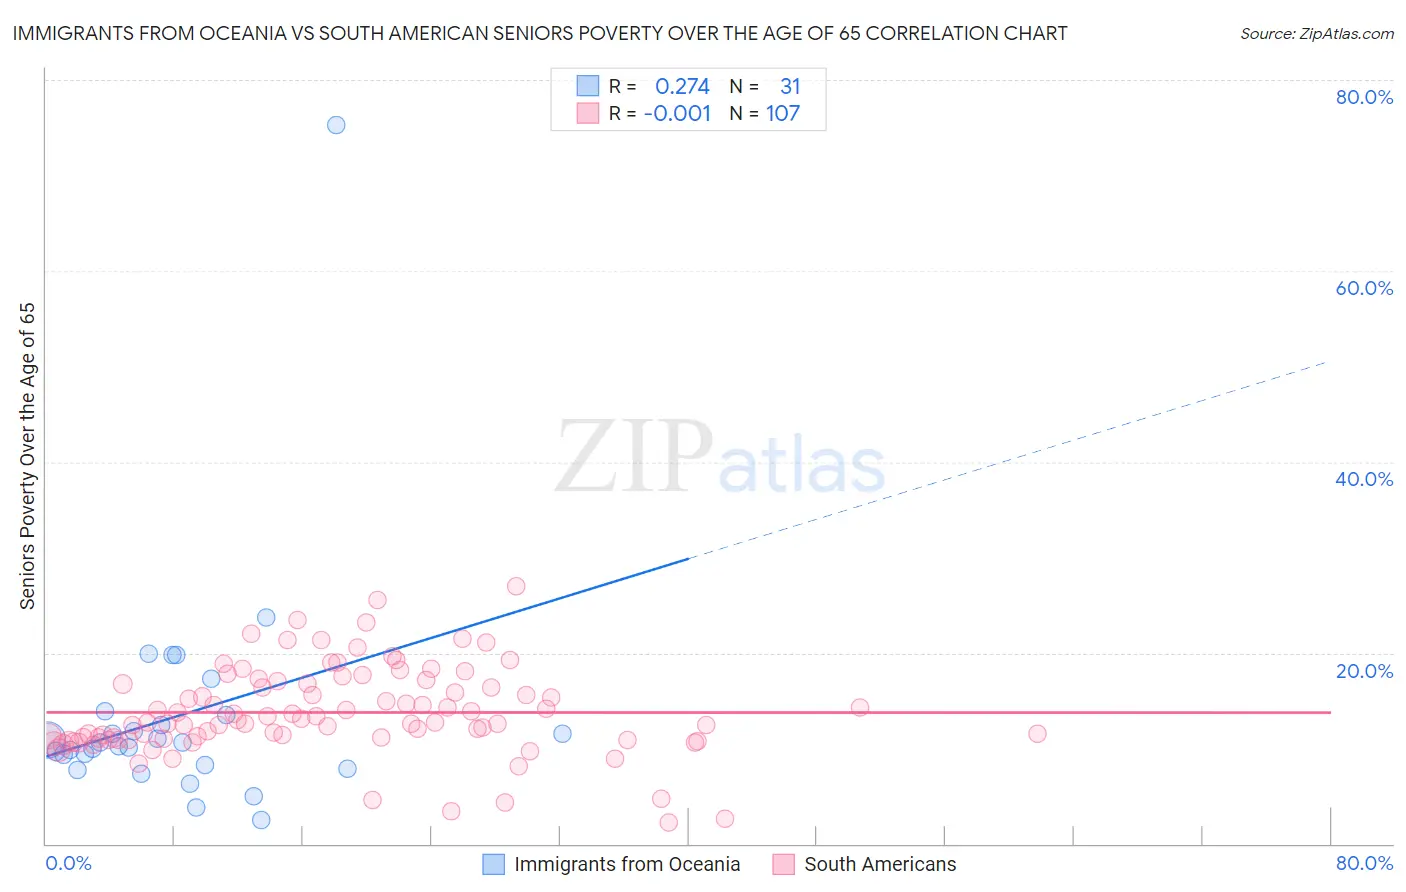 Immigrants from Oceania vs South American Seniors Poverty Over the Age of 65